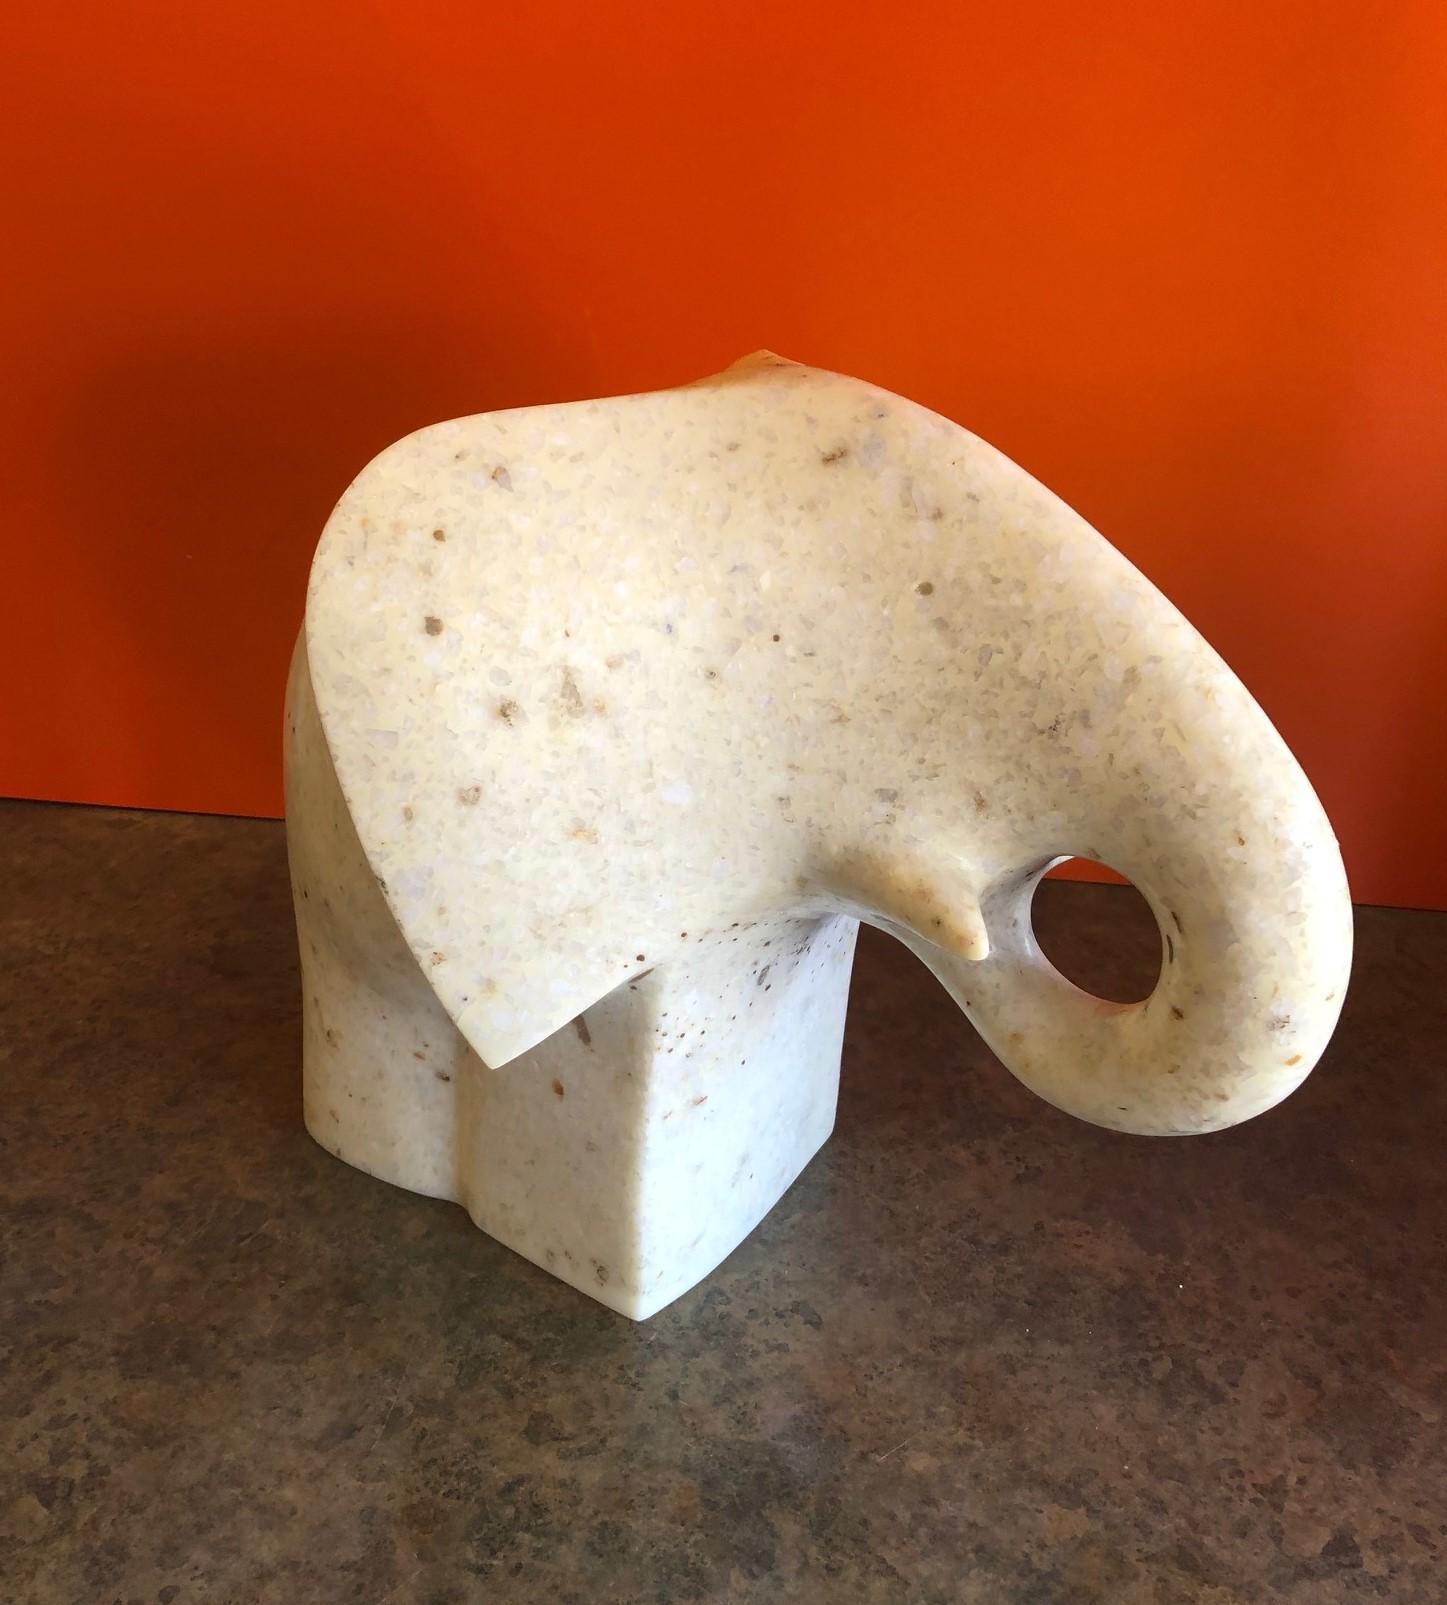 Solid white marble modernist elephant sculpture by Japanese Artist Masatoyo Kishi, circa 1970s. Impressive hand carved sculpture by the listed artist and sculptor who goes by the name 